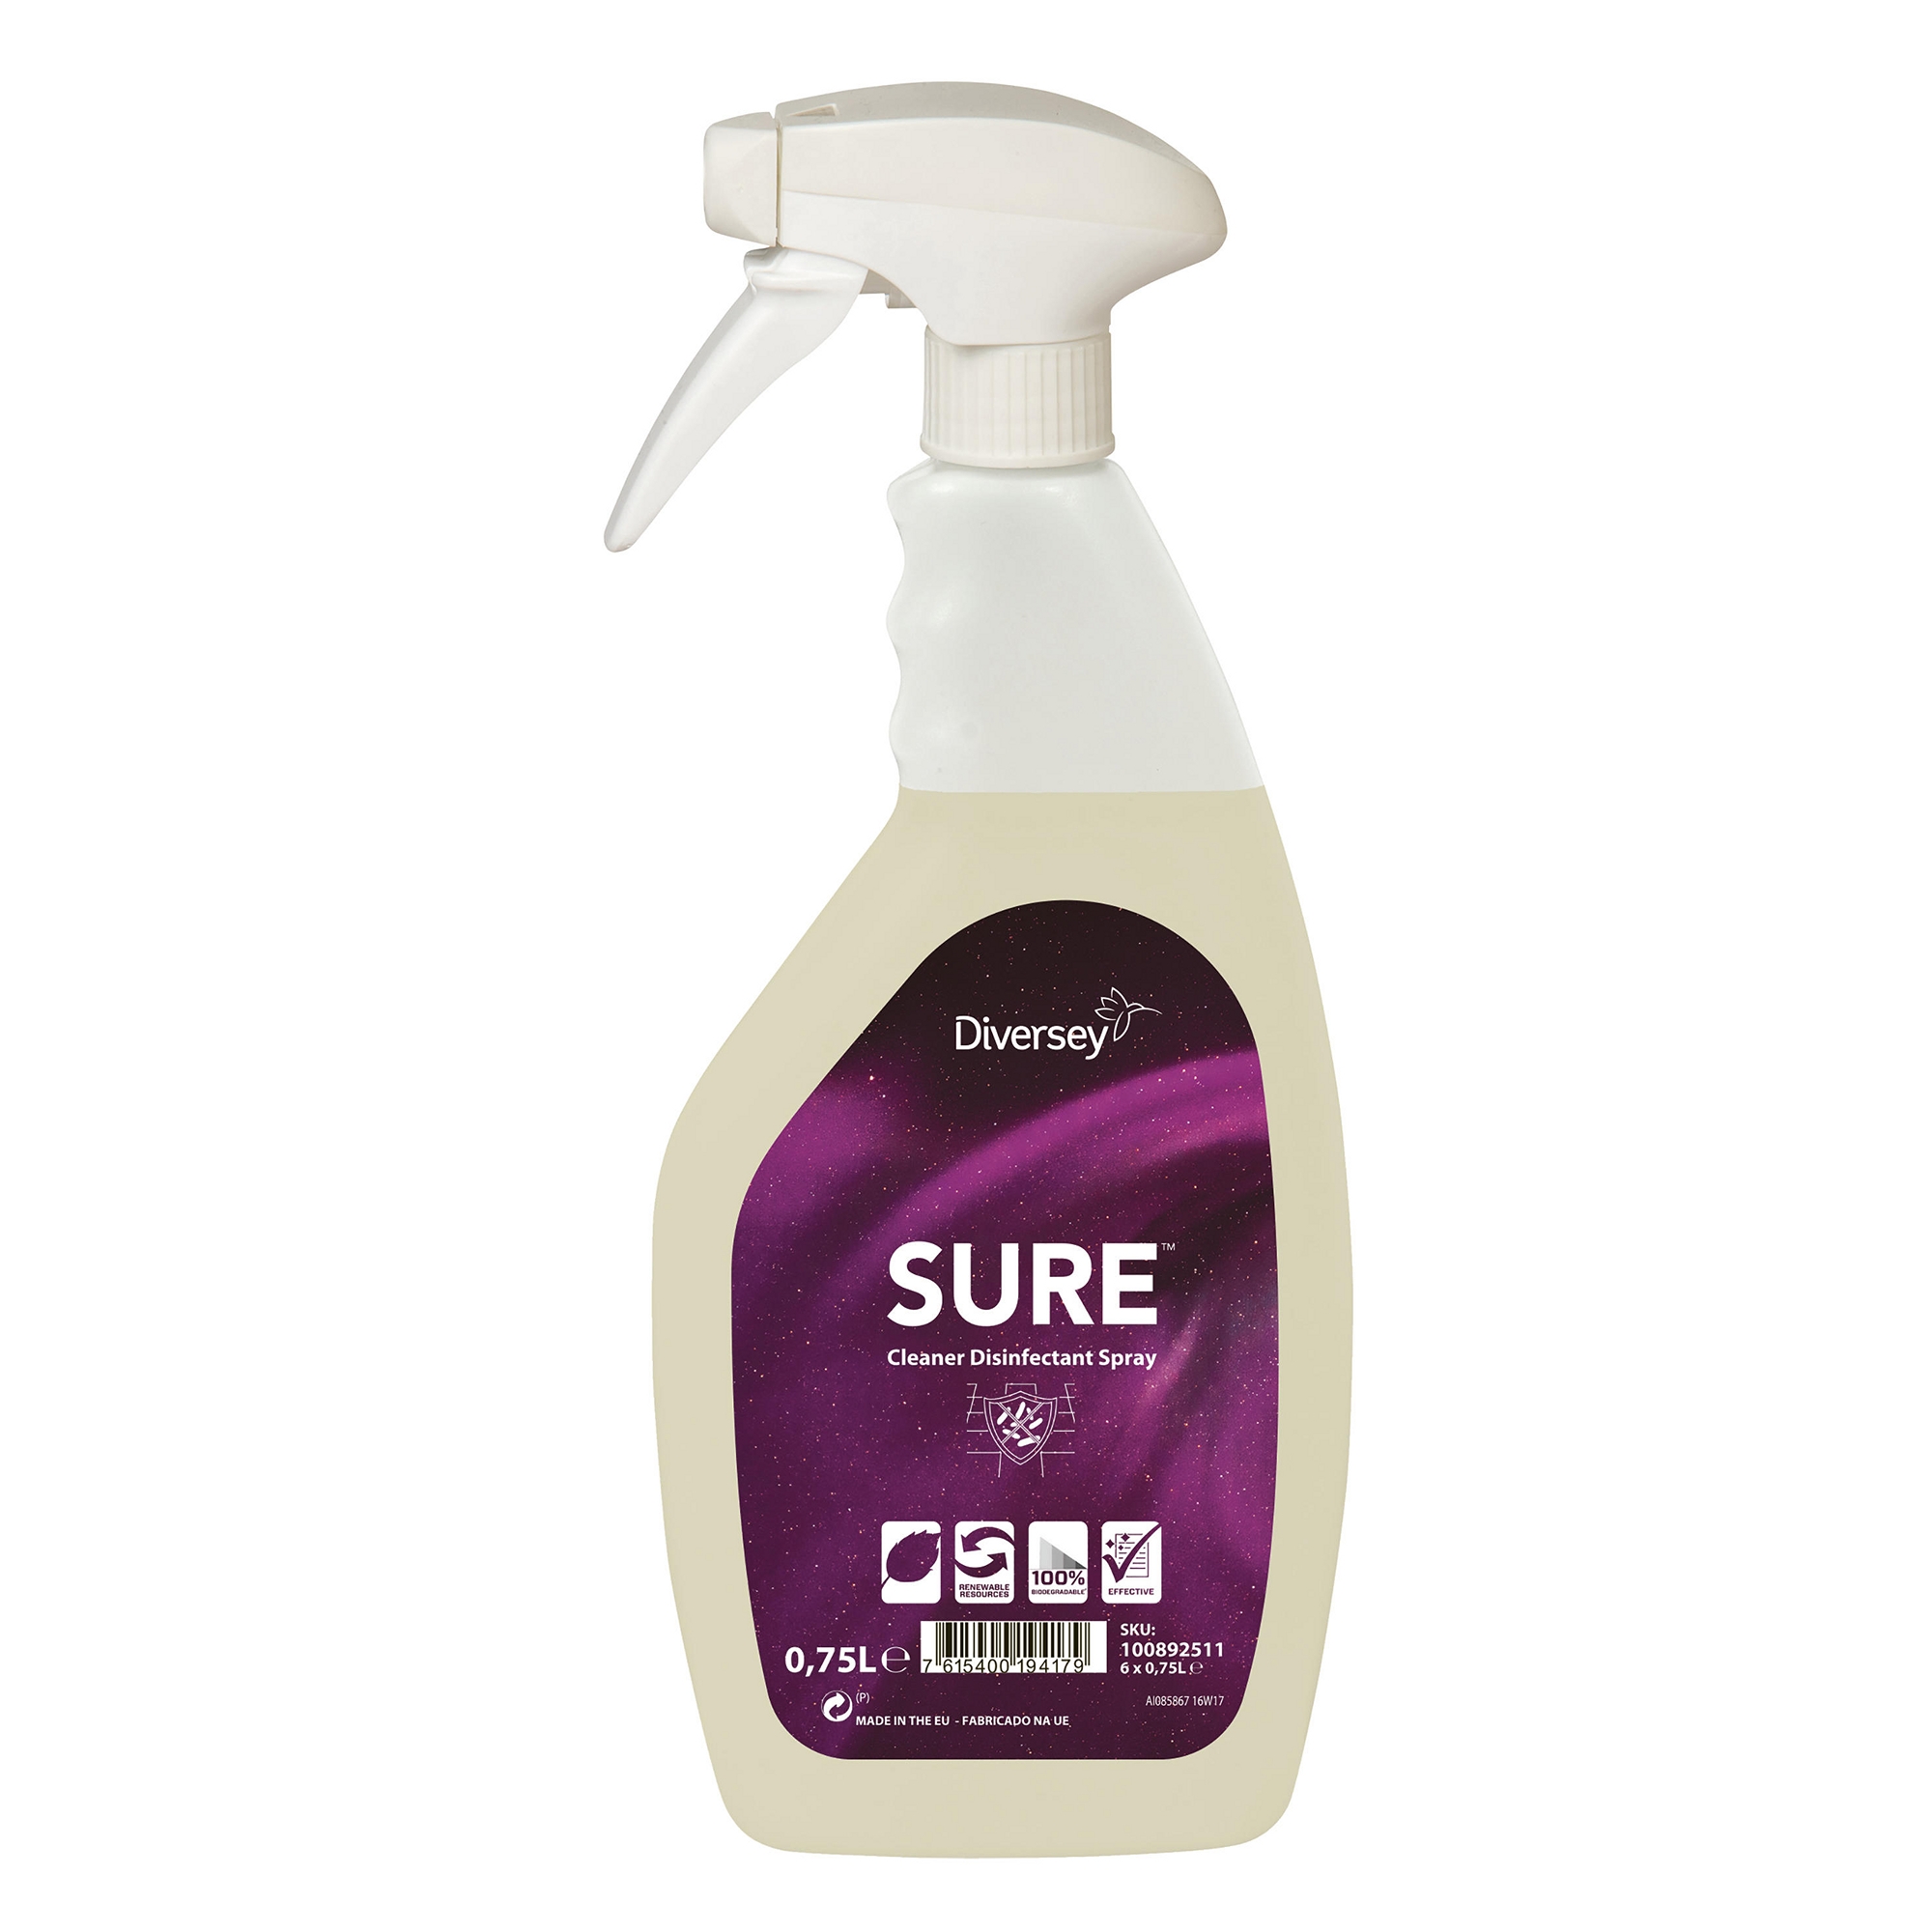 SURE Cleaner Disinfectant